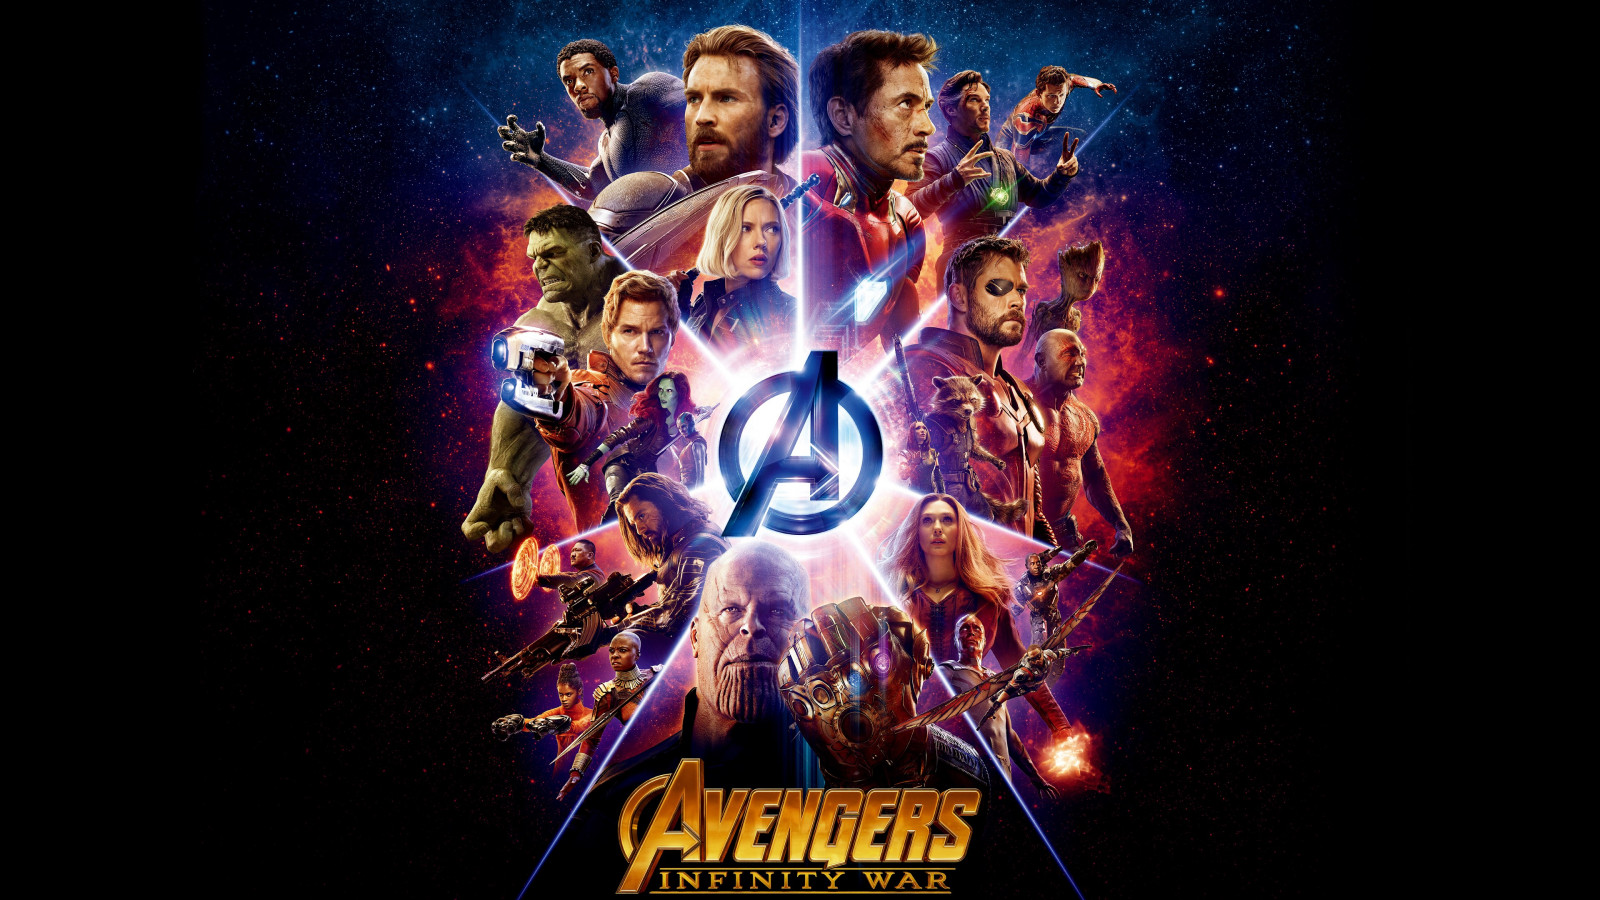 All the heroes from Avengers: Infinity War wallpaper 1600x900